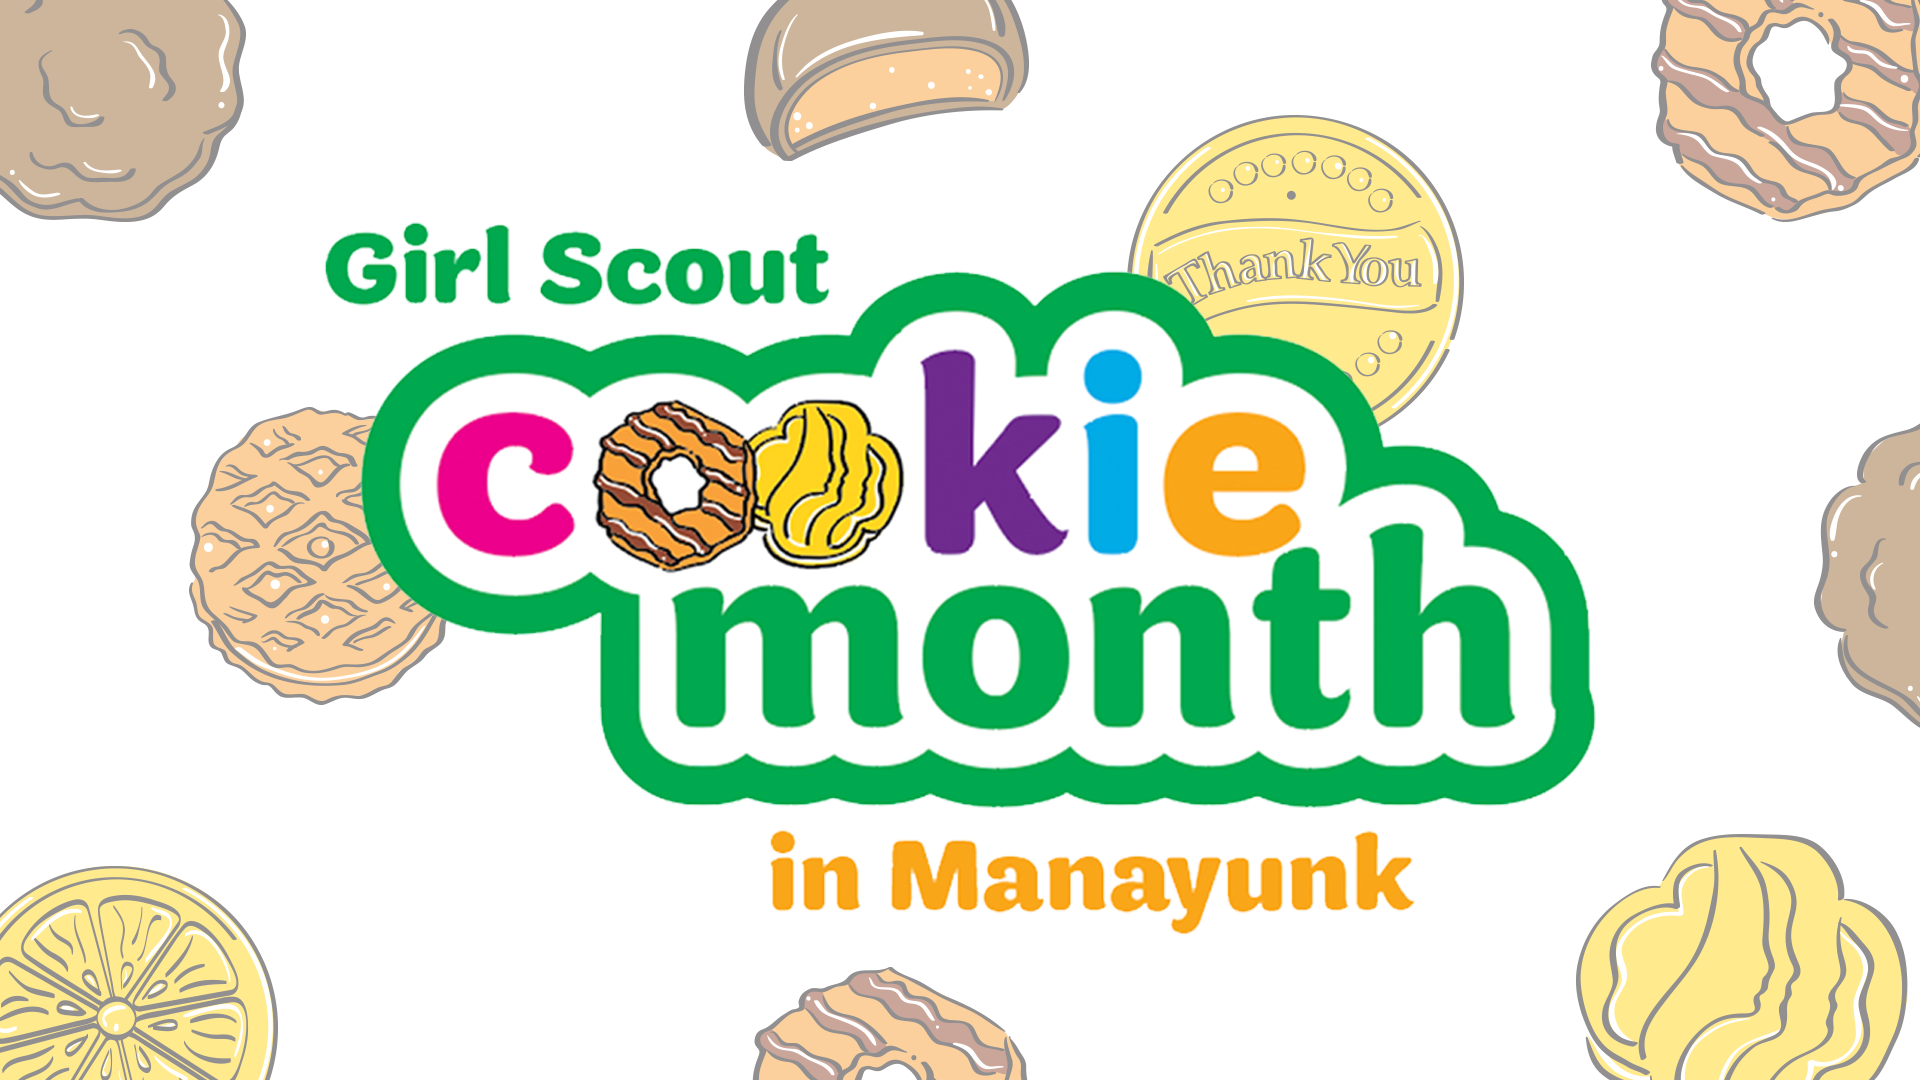 Girl Scout Cookie Month in Manayunkk